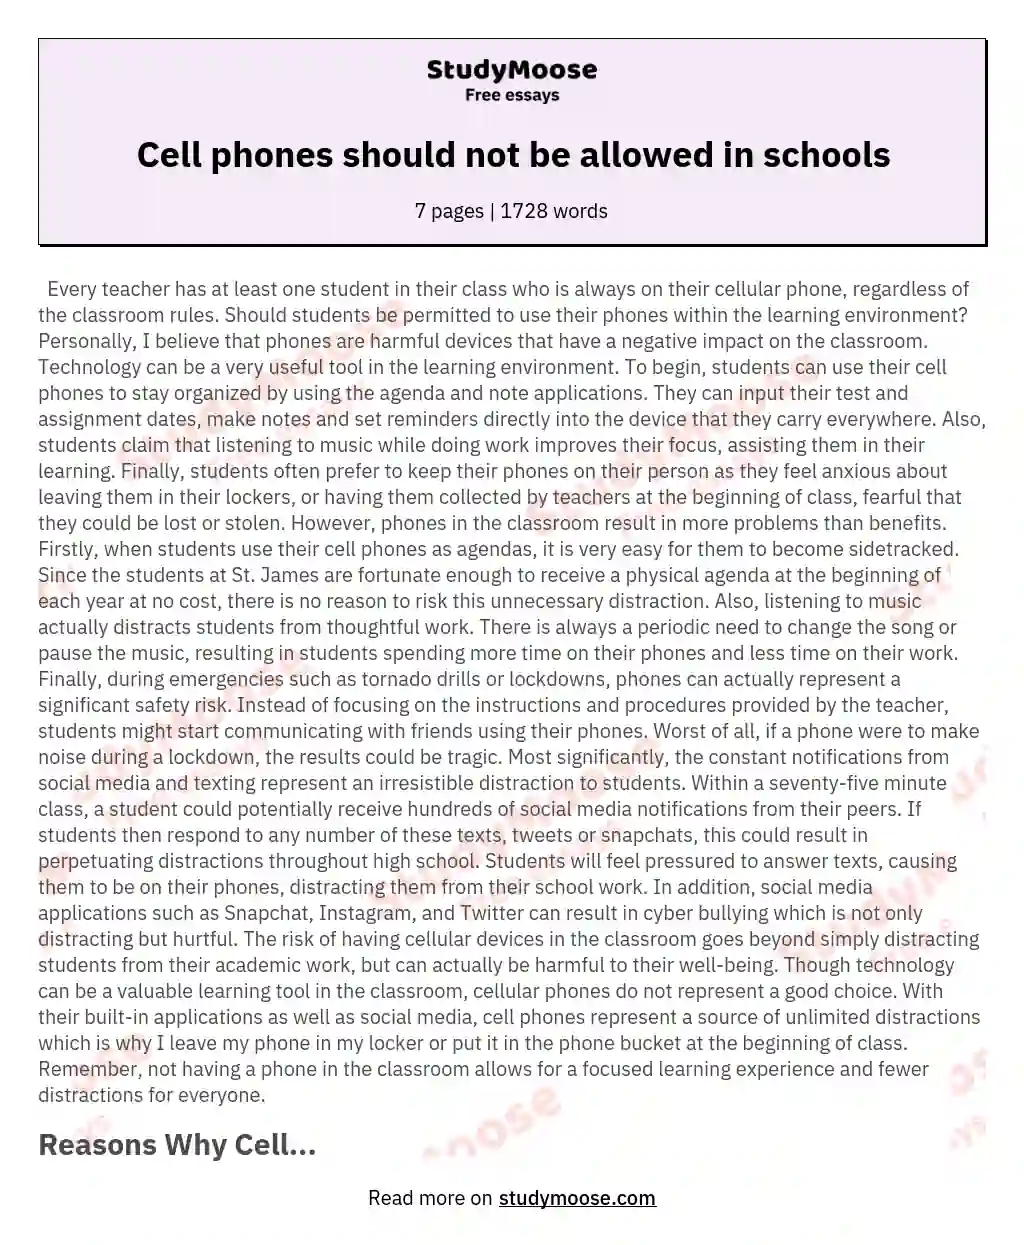 Cell phones should not be allowed in schools essay